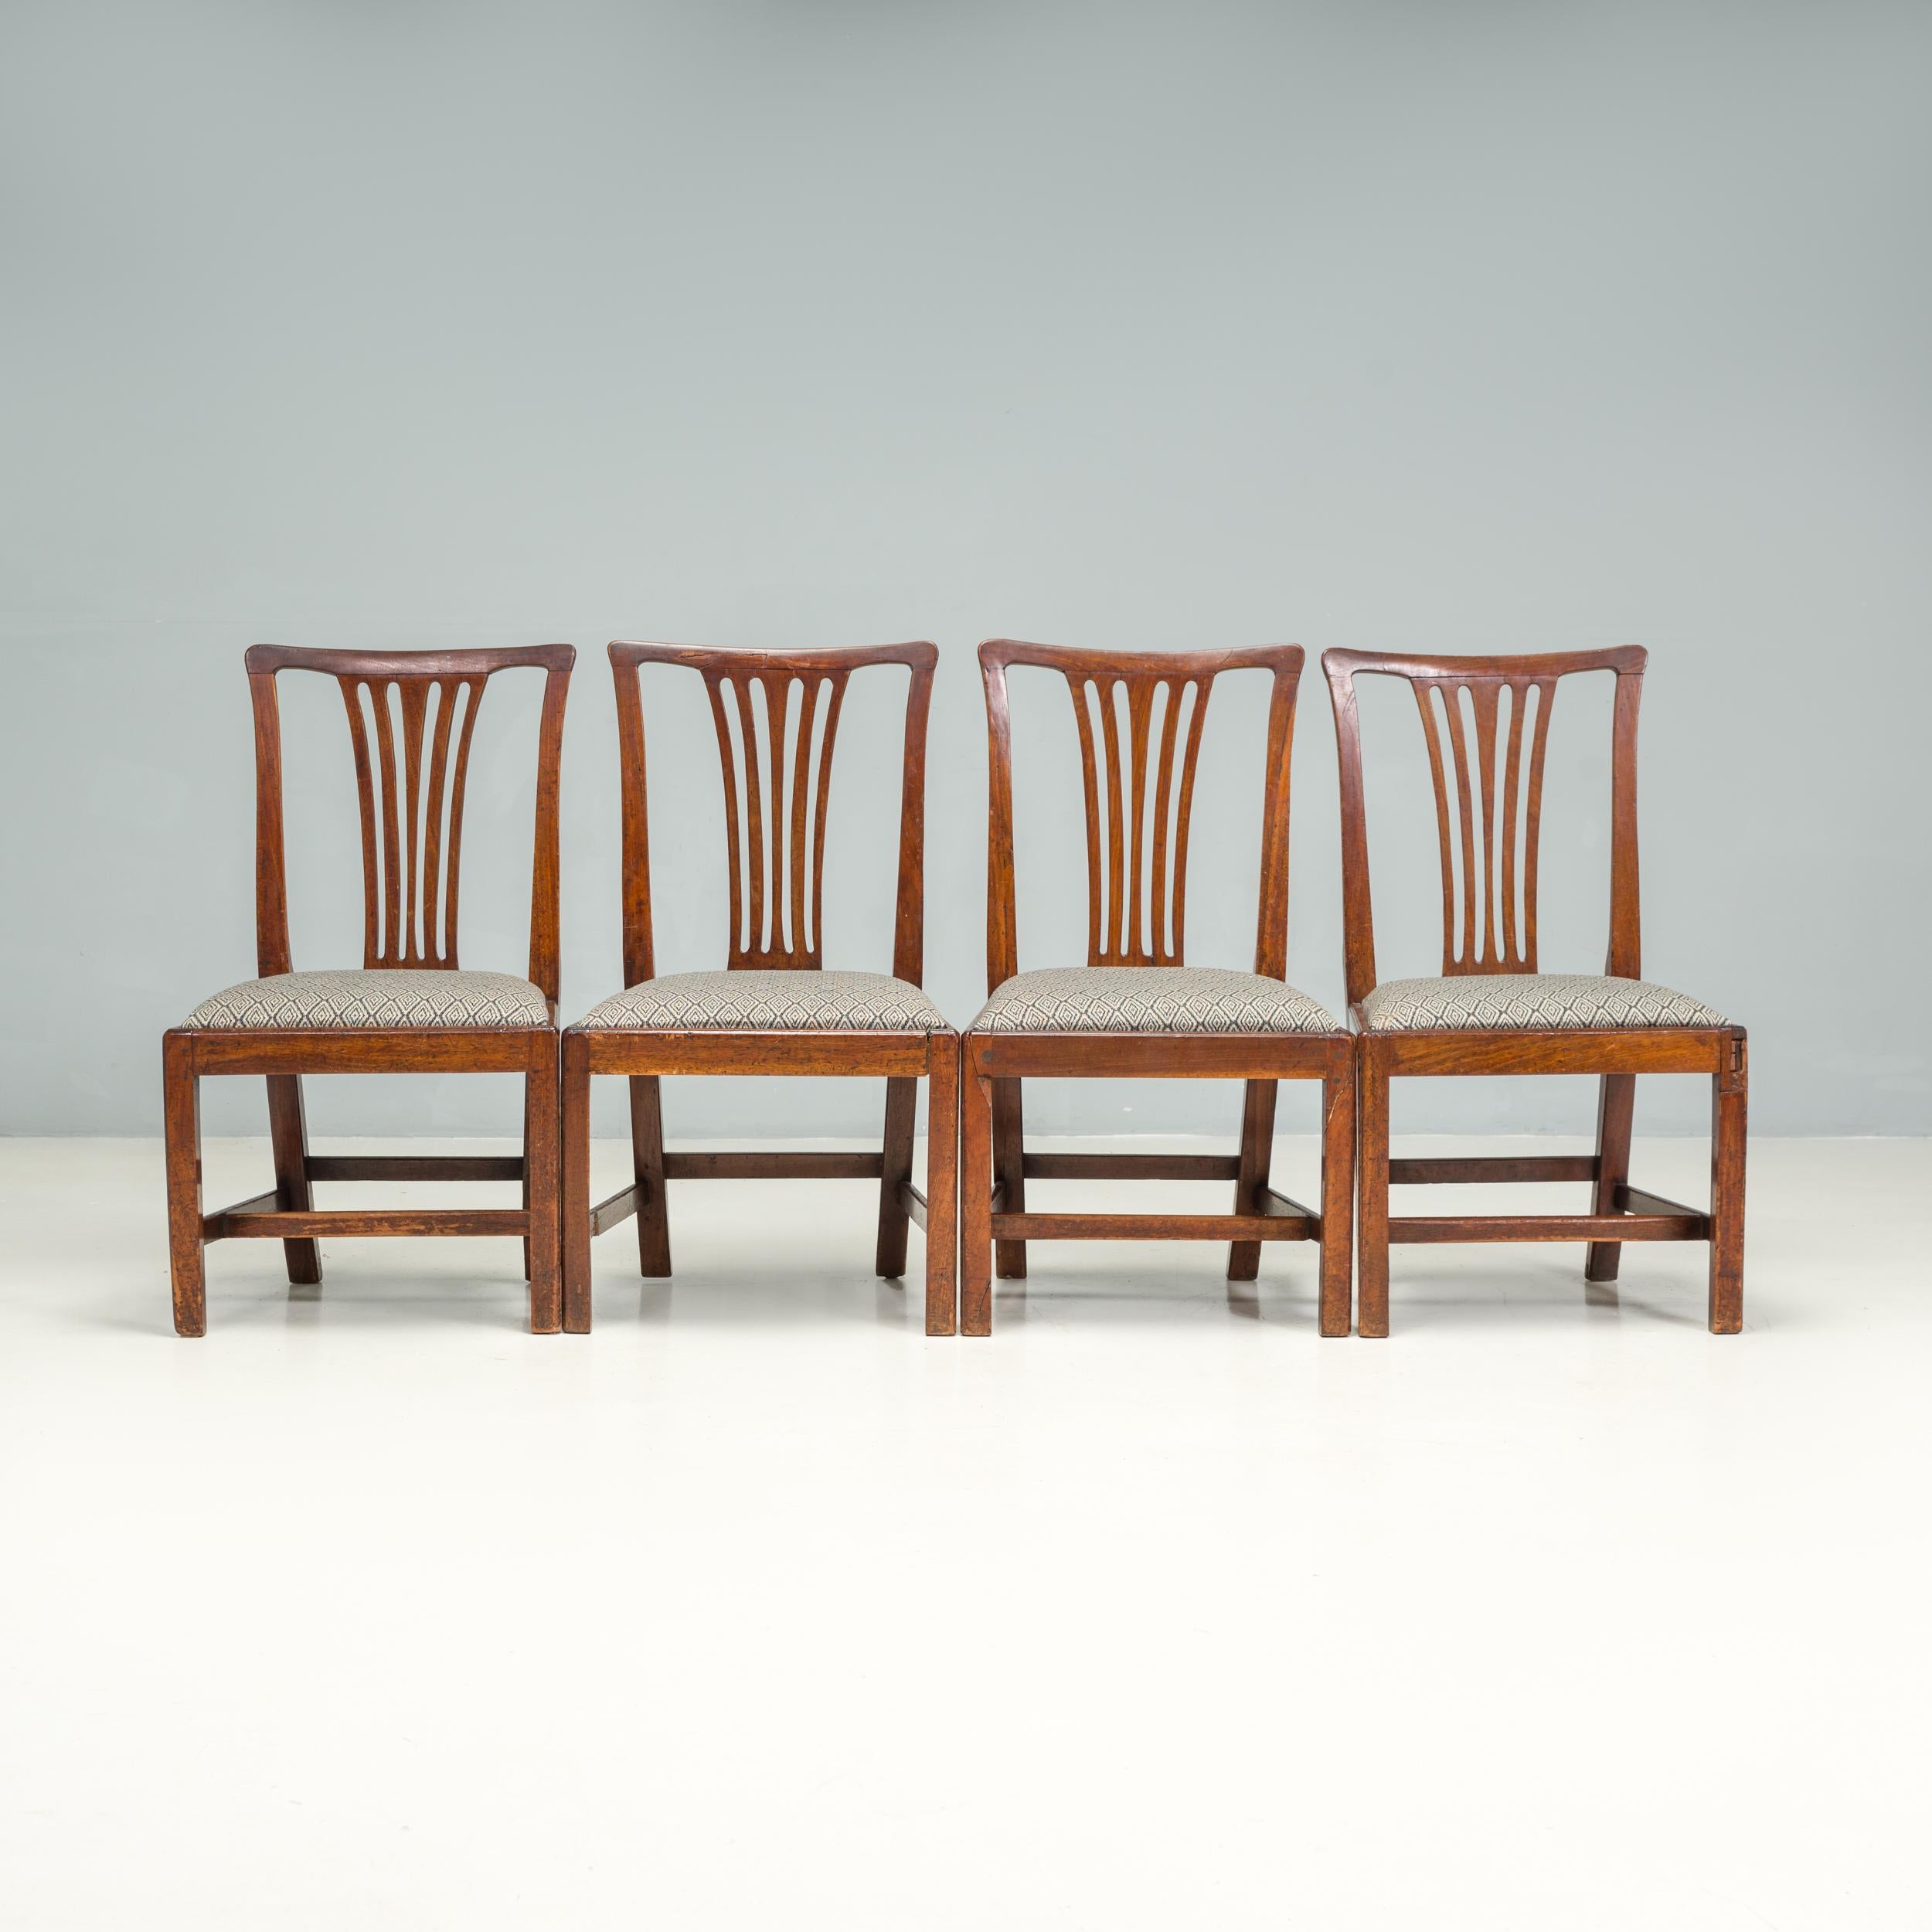 A fantastic set of four Chippendale style dining chairs, beautifully constructed from dark wood.

The chairs feature the classic splat back style, with a decorative pierced fan detail and slightly curved top.

The front legs and stretcher, in